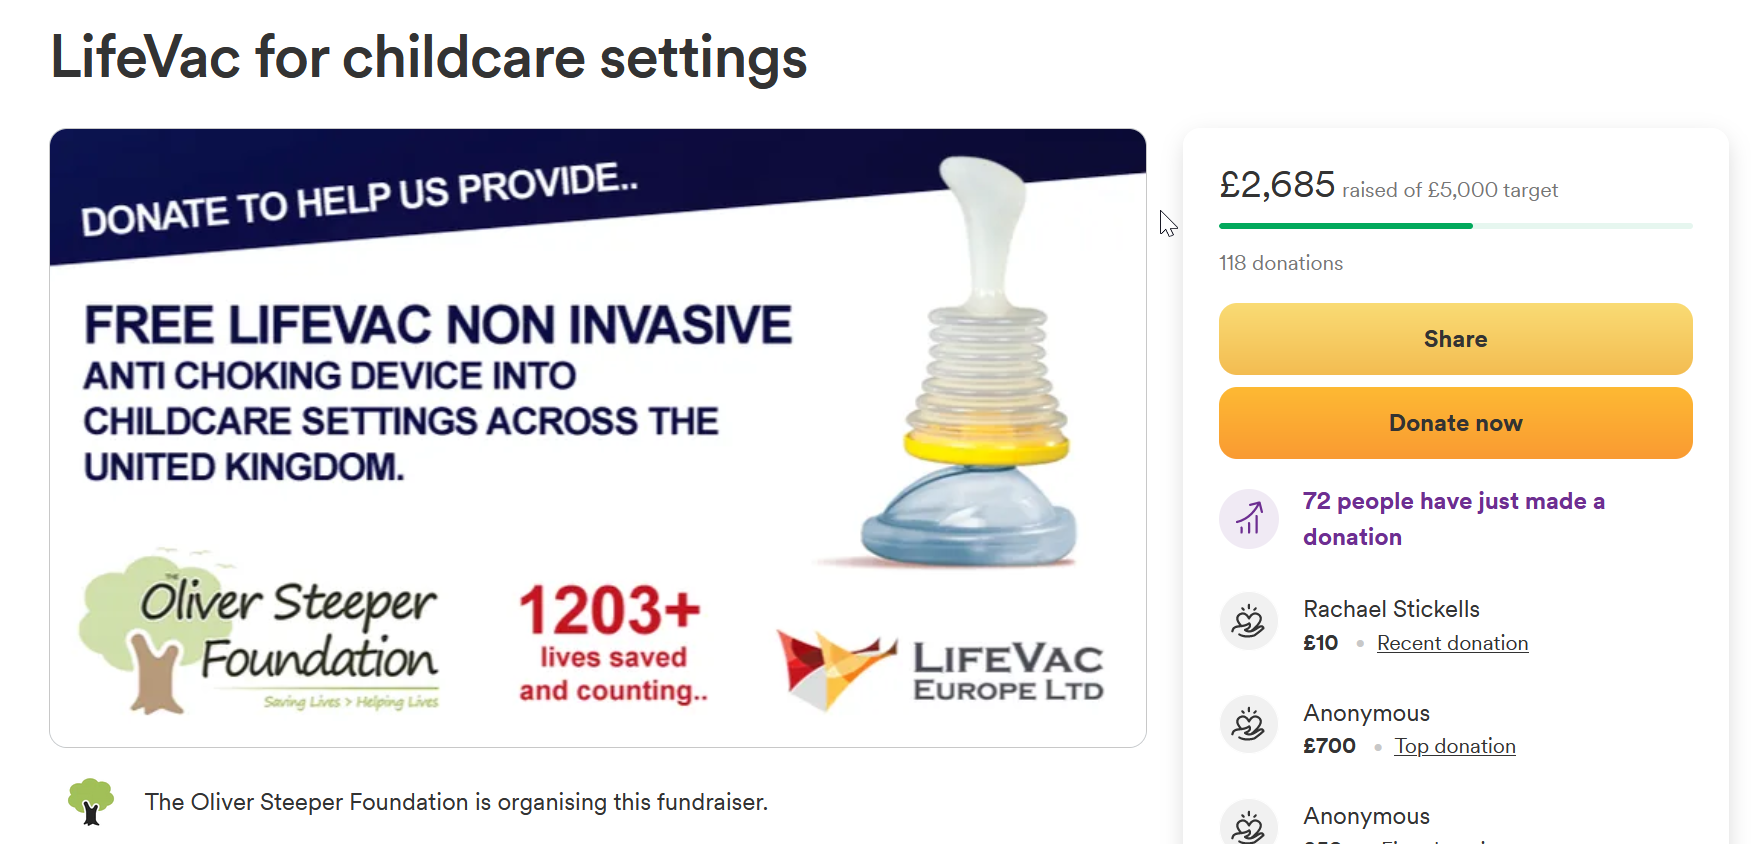 2023-08-22-13_54_39-fundraiser-by-the-oliver-steeper-foundation-_-lifevac-for-childcare-settings-m.png